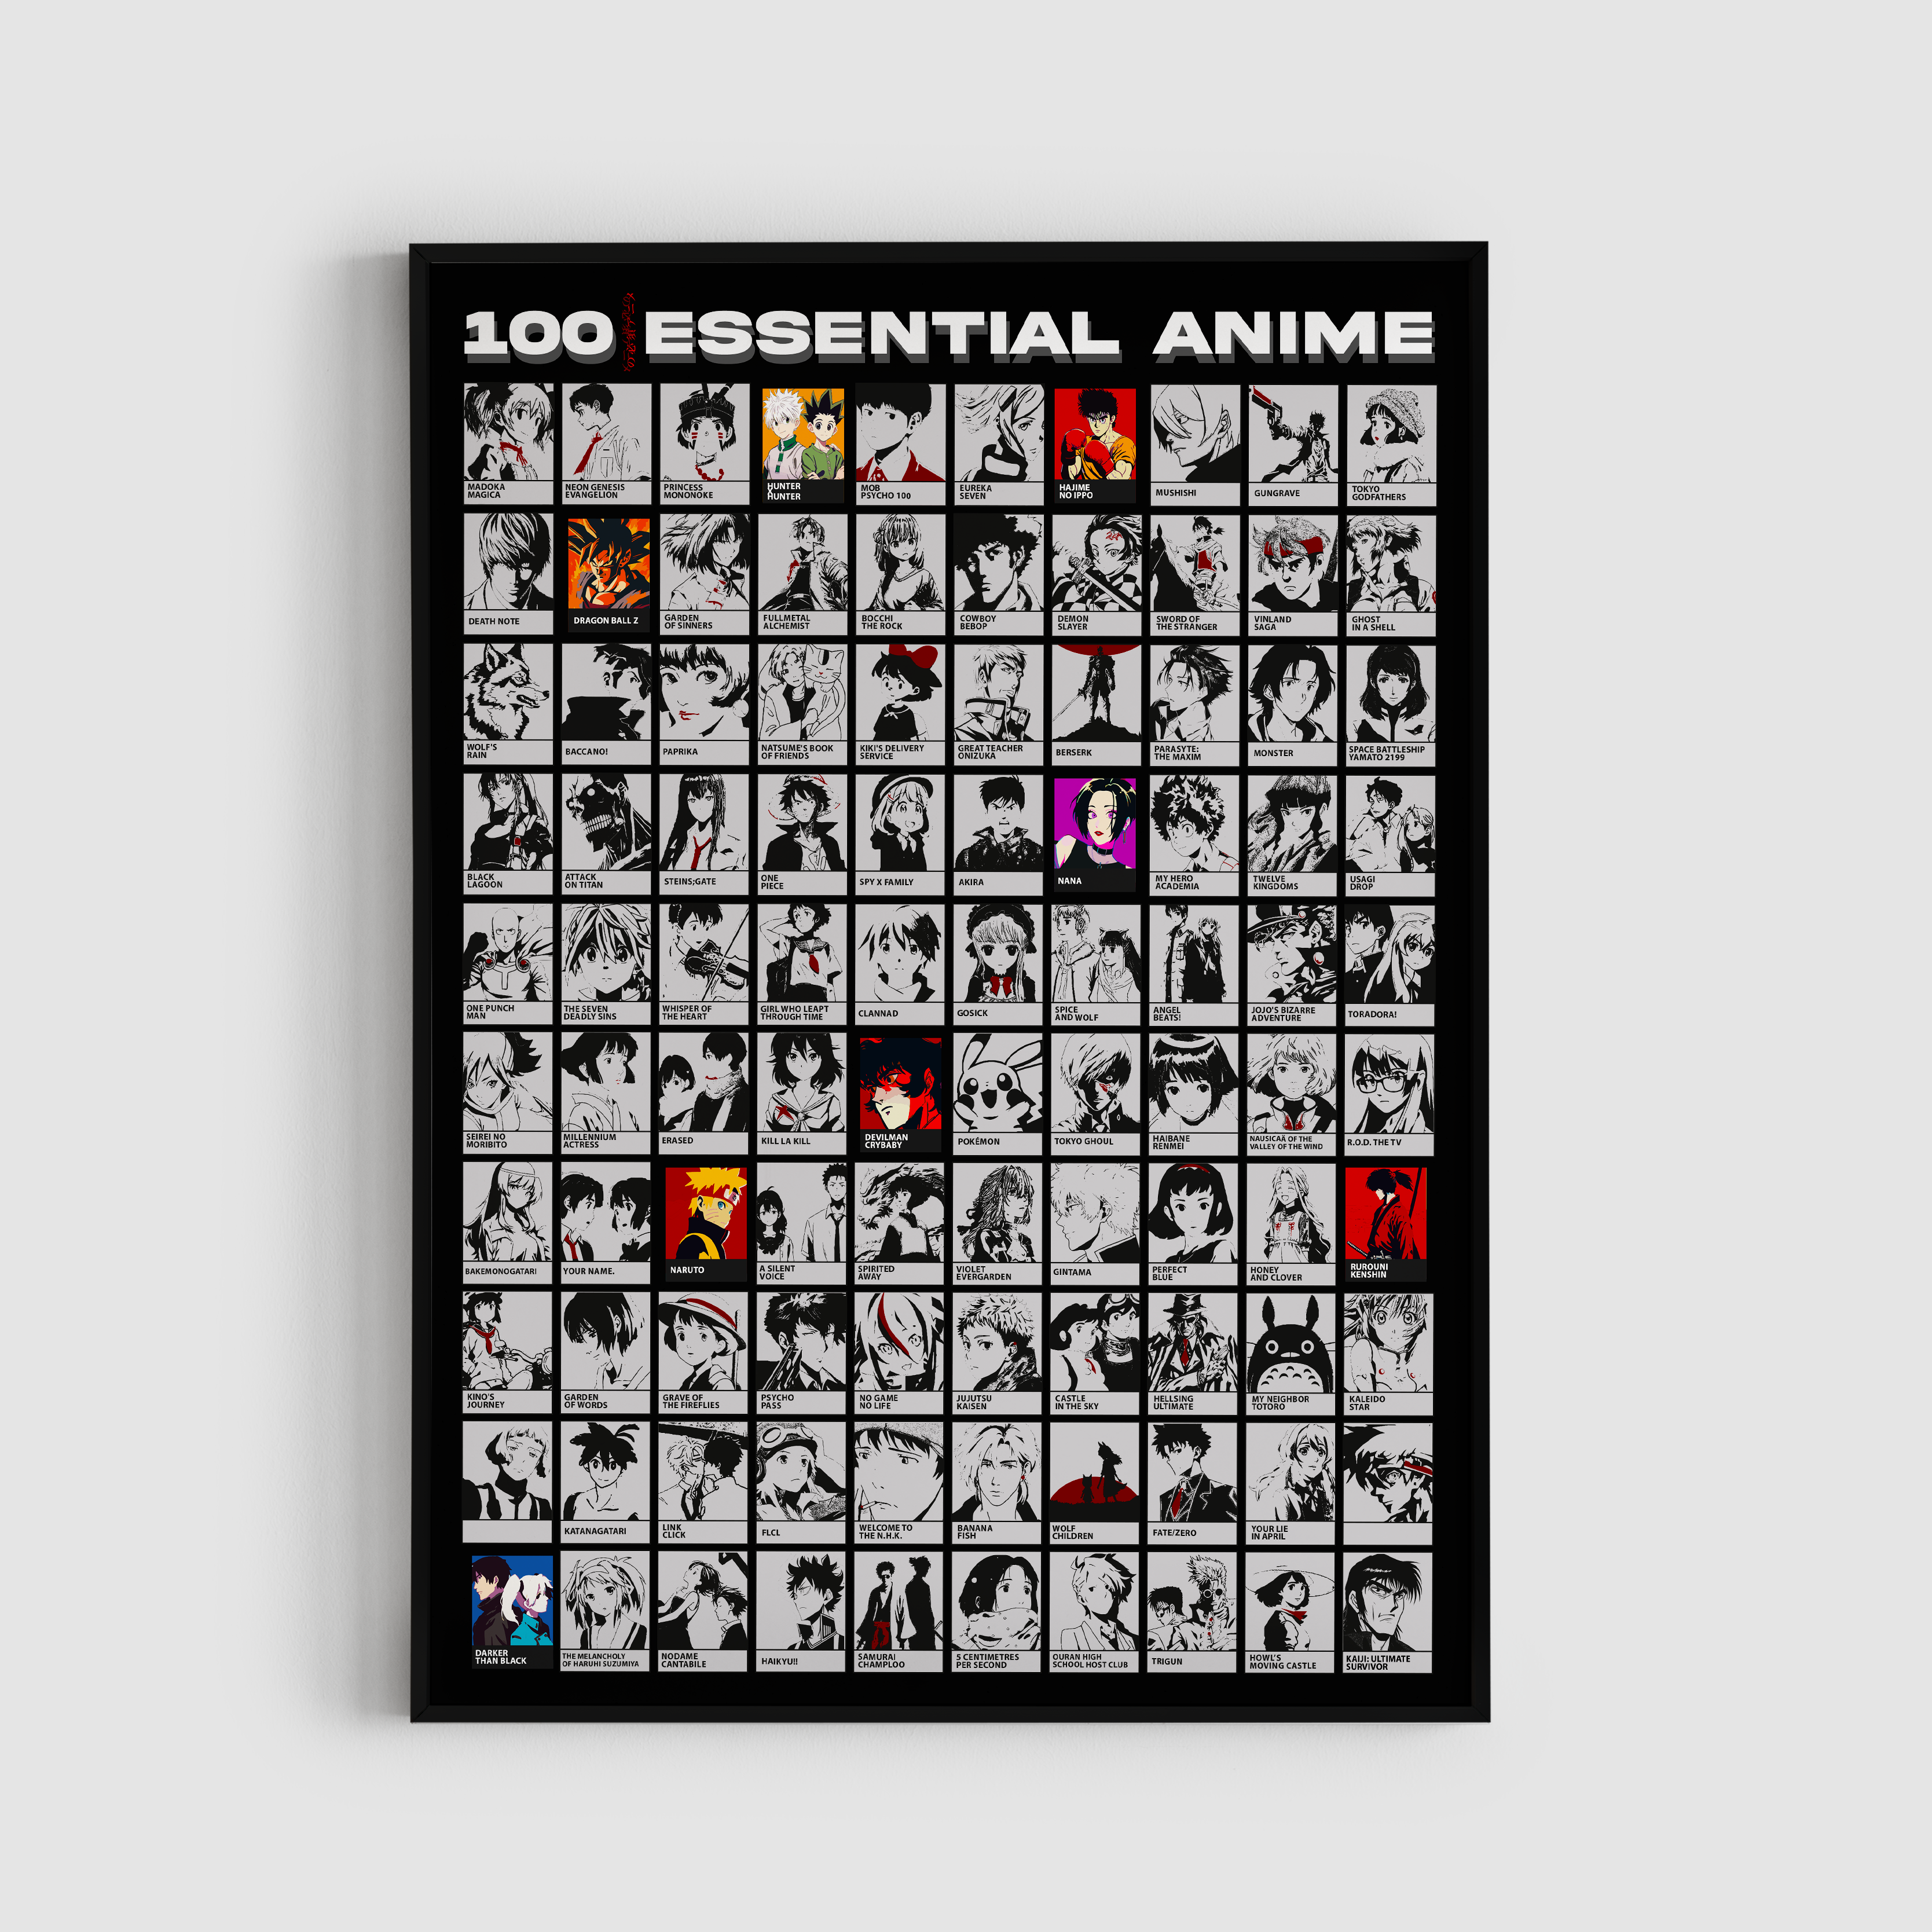  Enno Vatti 100 Anime Scratch Off Poster - Top Animes Of All  Time (16.5 x 23.4)- Ultimate Bucket List/Cool Anime Stuff- Best Gifts for  Anime Lovers, Christmas, Easter, Valentine's Day 